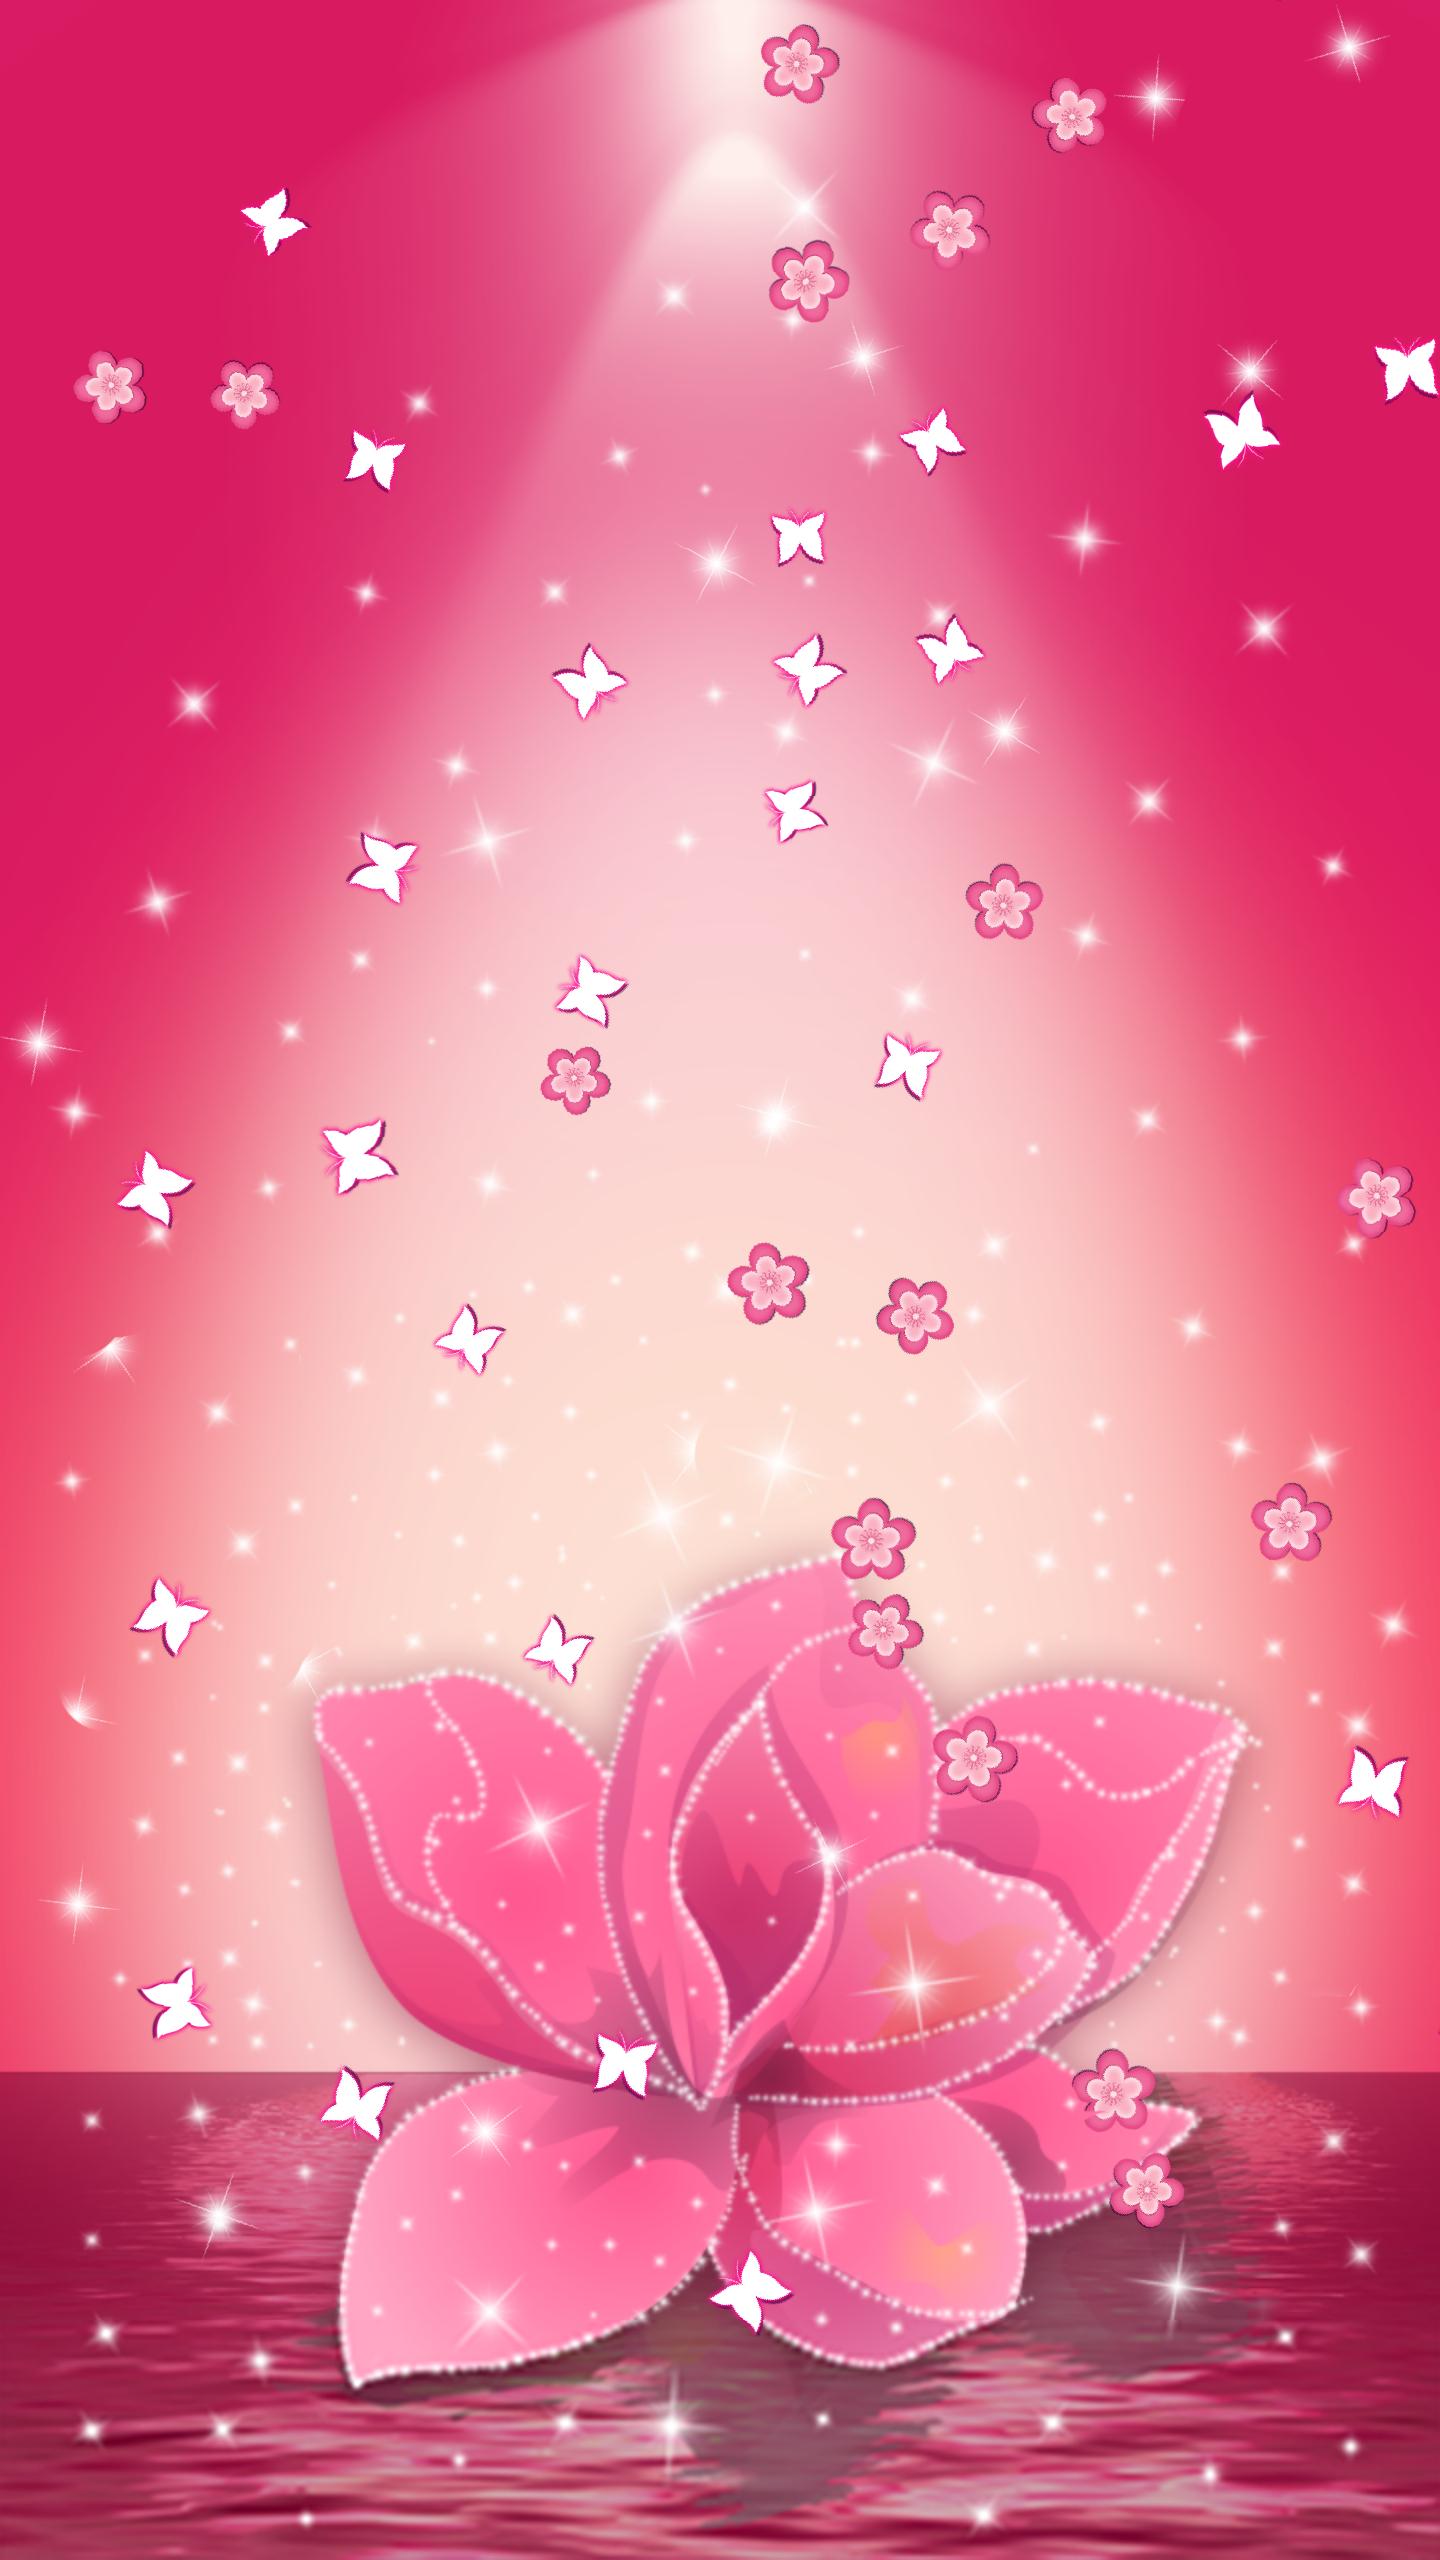 Beautiful Flowers Glowing Live Wallpaper for Android